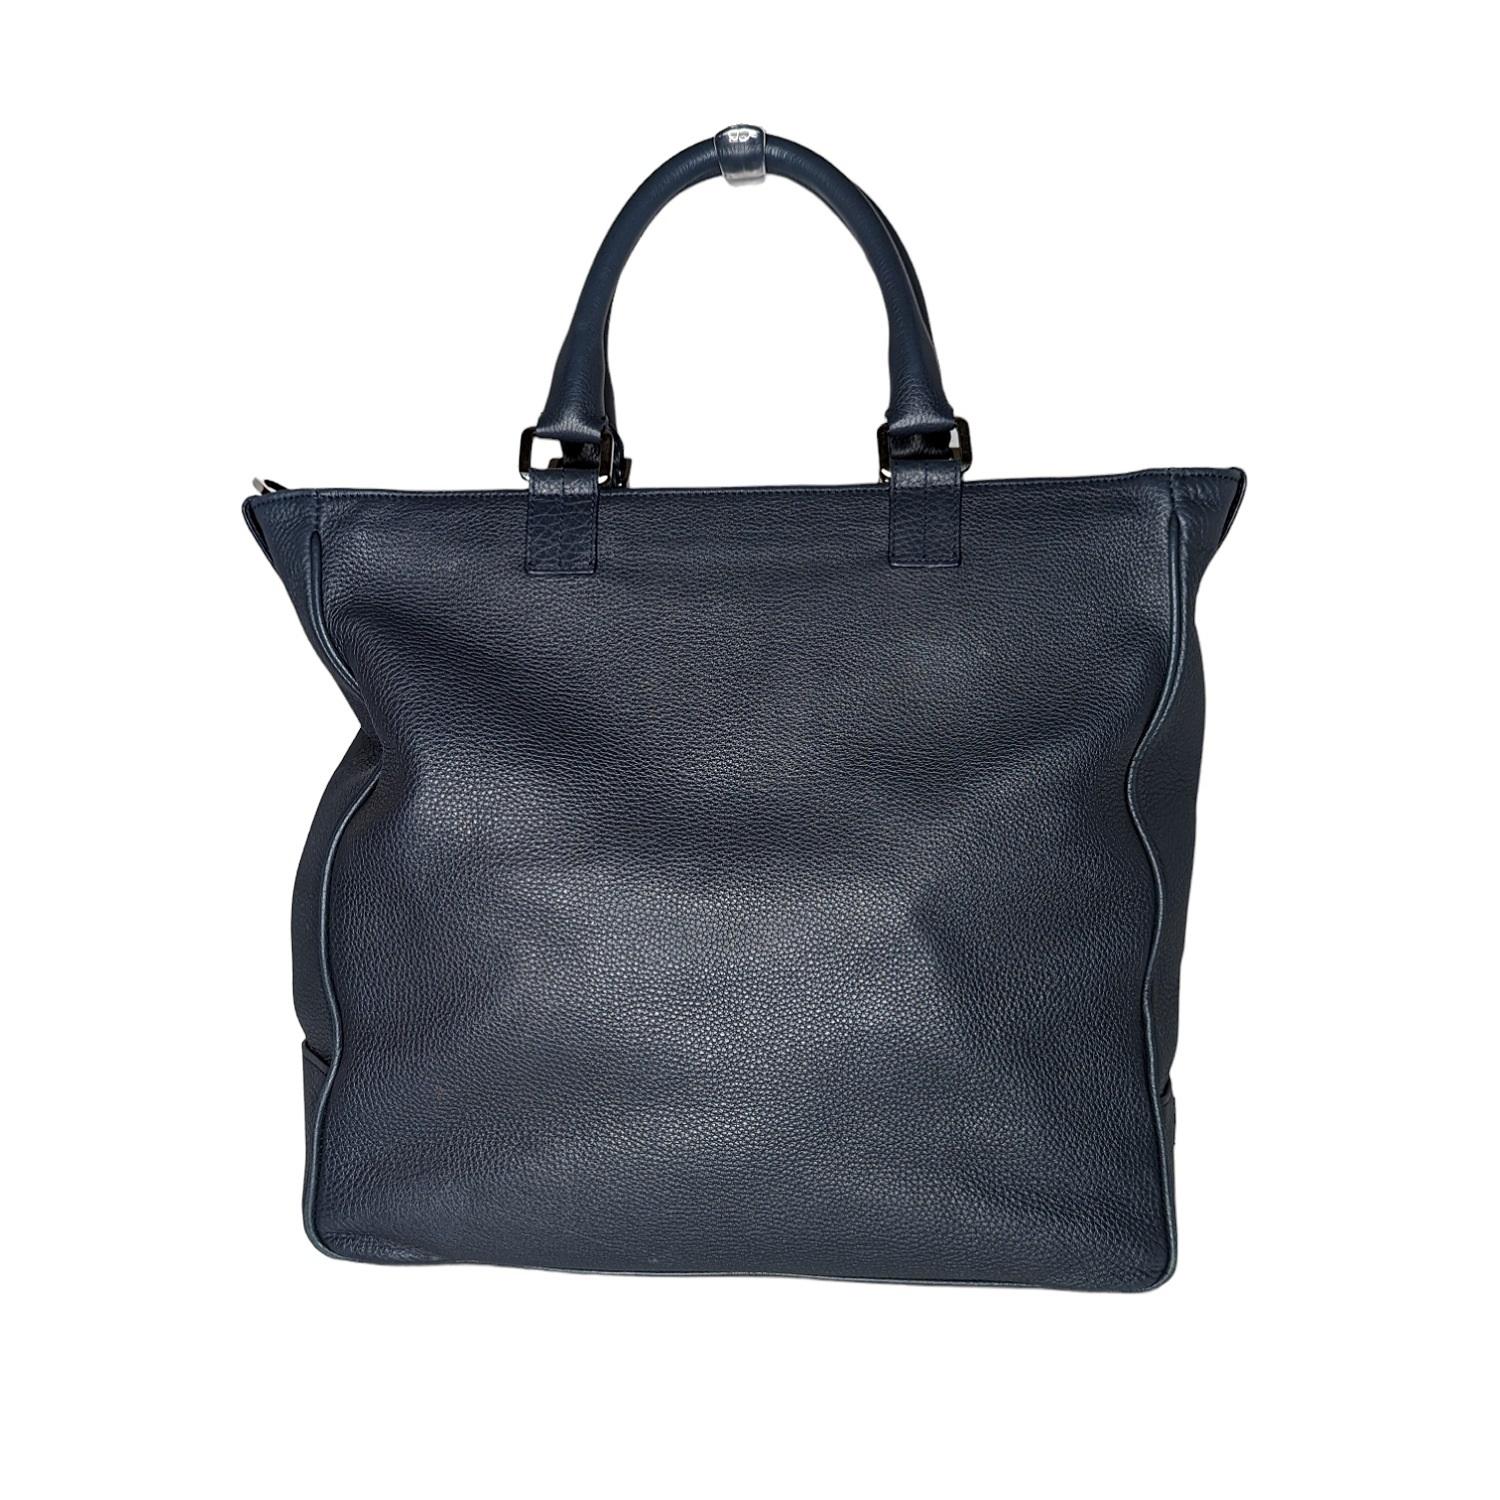 Tiffany & Co. Blake Convertible Tote Leather is an elegant everyday staple. Crafted from supple navy pebbled leather, this oversized tote features dual-rolled leather handles, exterior front zip pocket, and silver-tone hardware accents. Its top zip